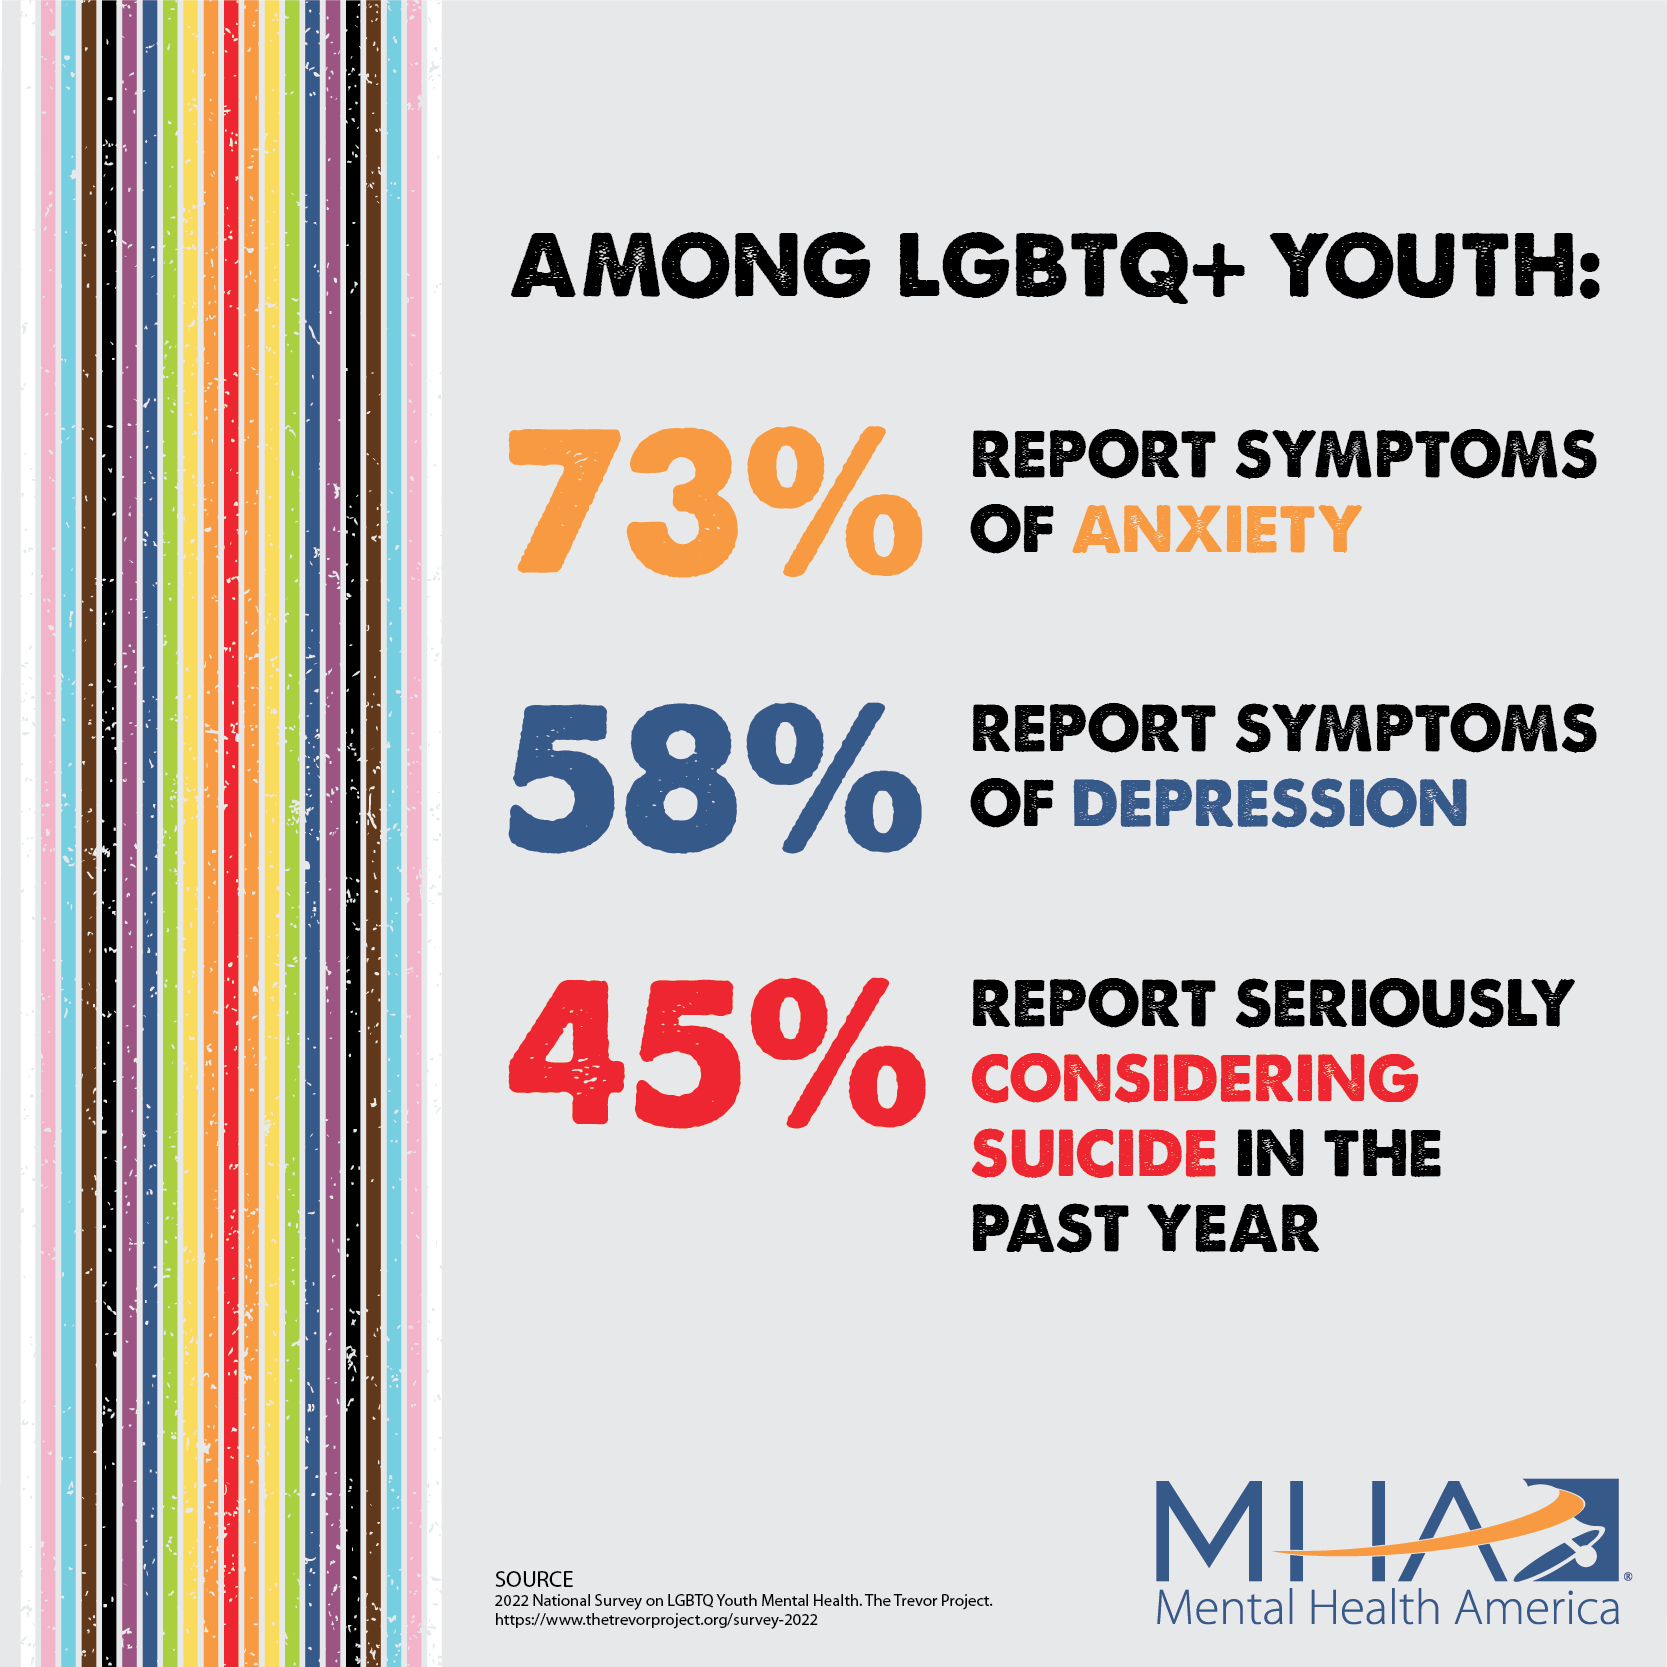 Among LGBTQ+ youth: 73% report symptoms of anxiety, 58% report symptoms of depression, 45% report seriously considering suicide in the past year